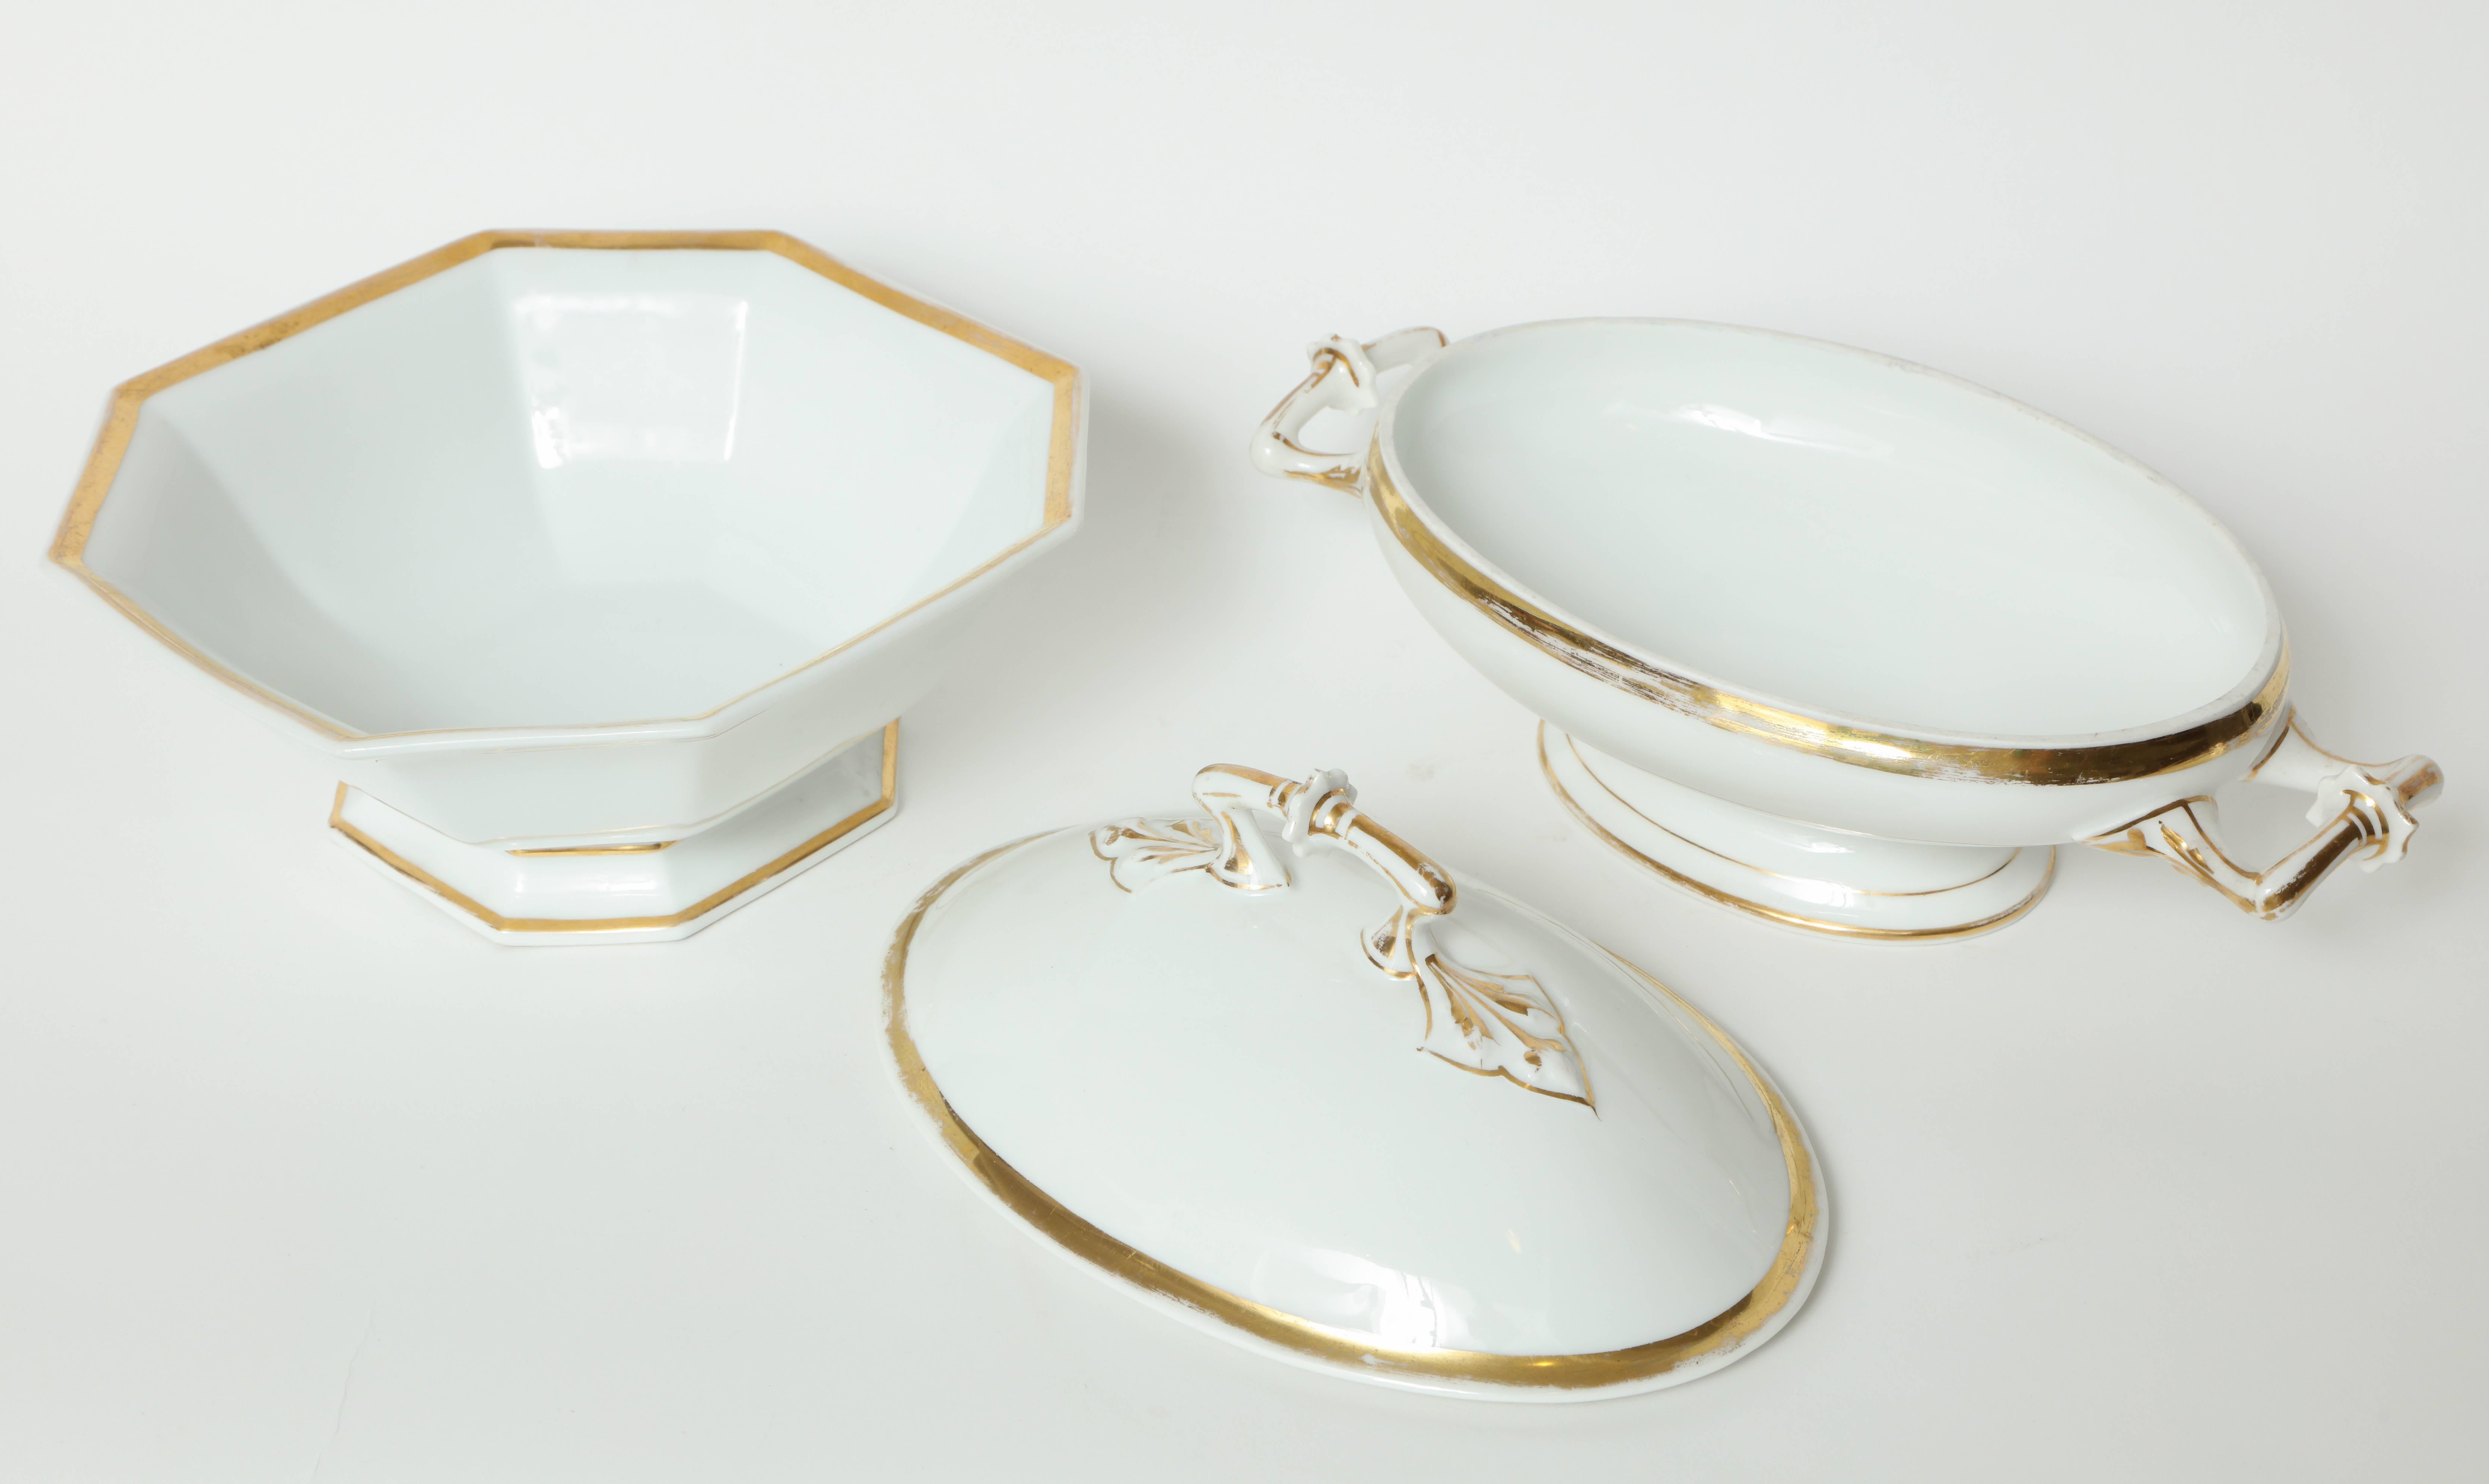 Art Deco Pair of French Porcelain Serving Dishes